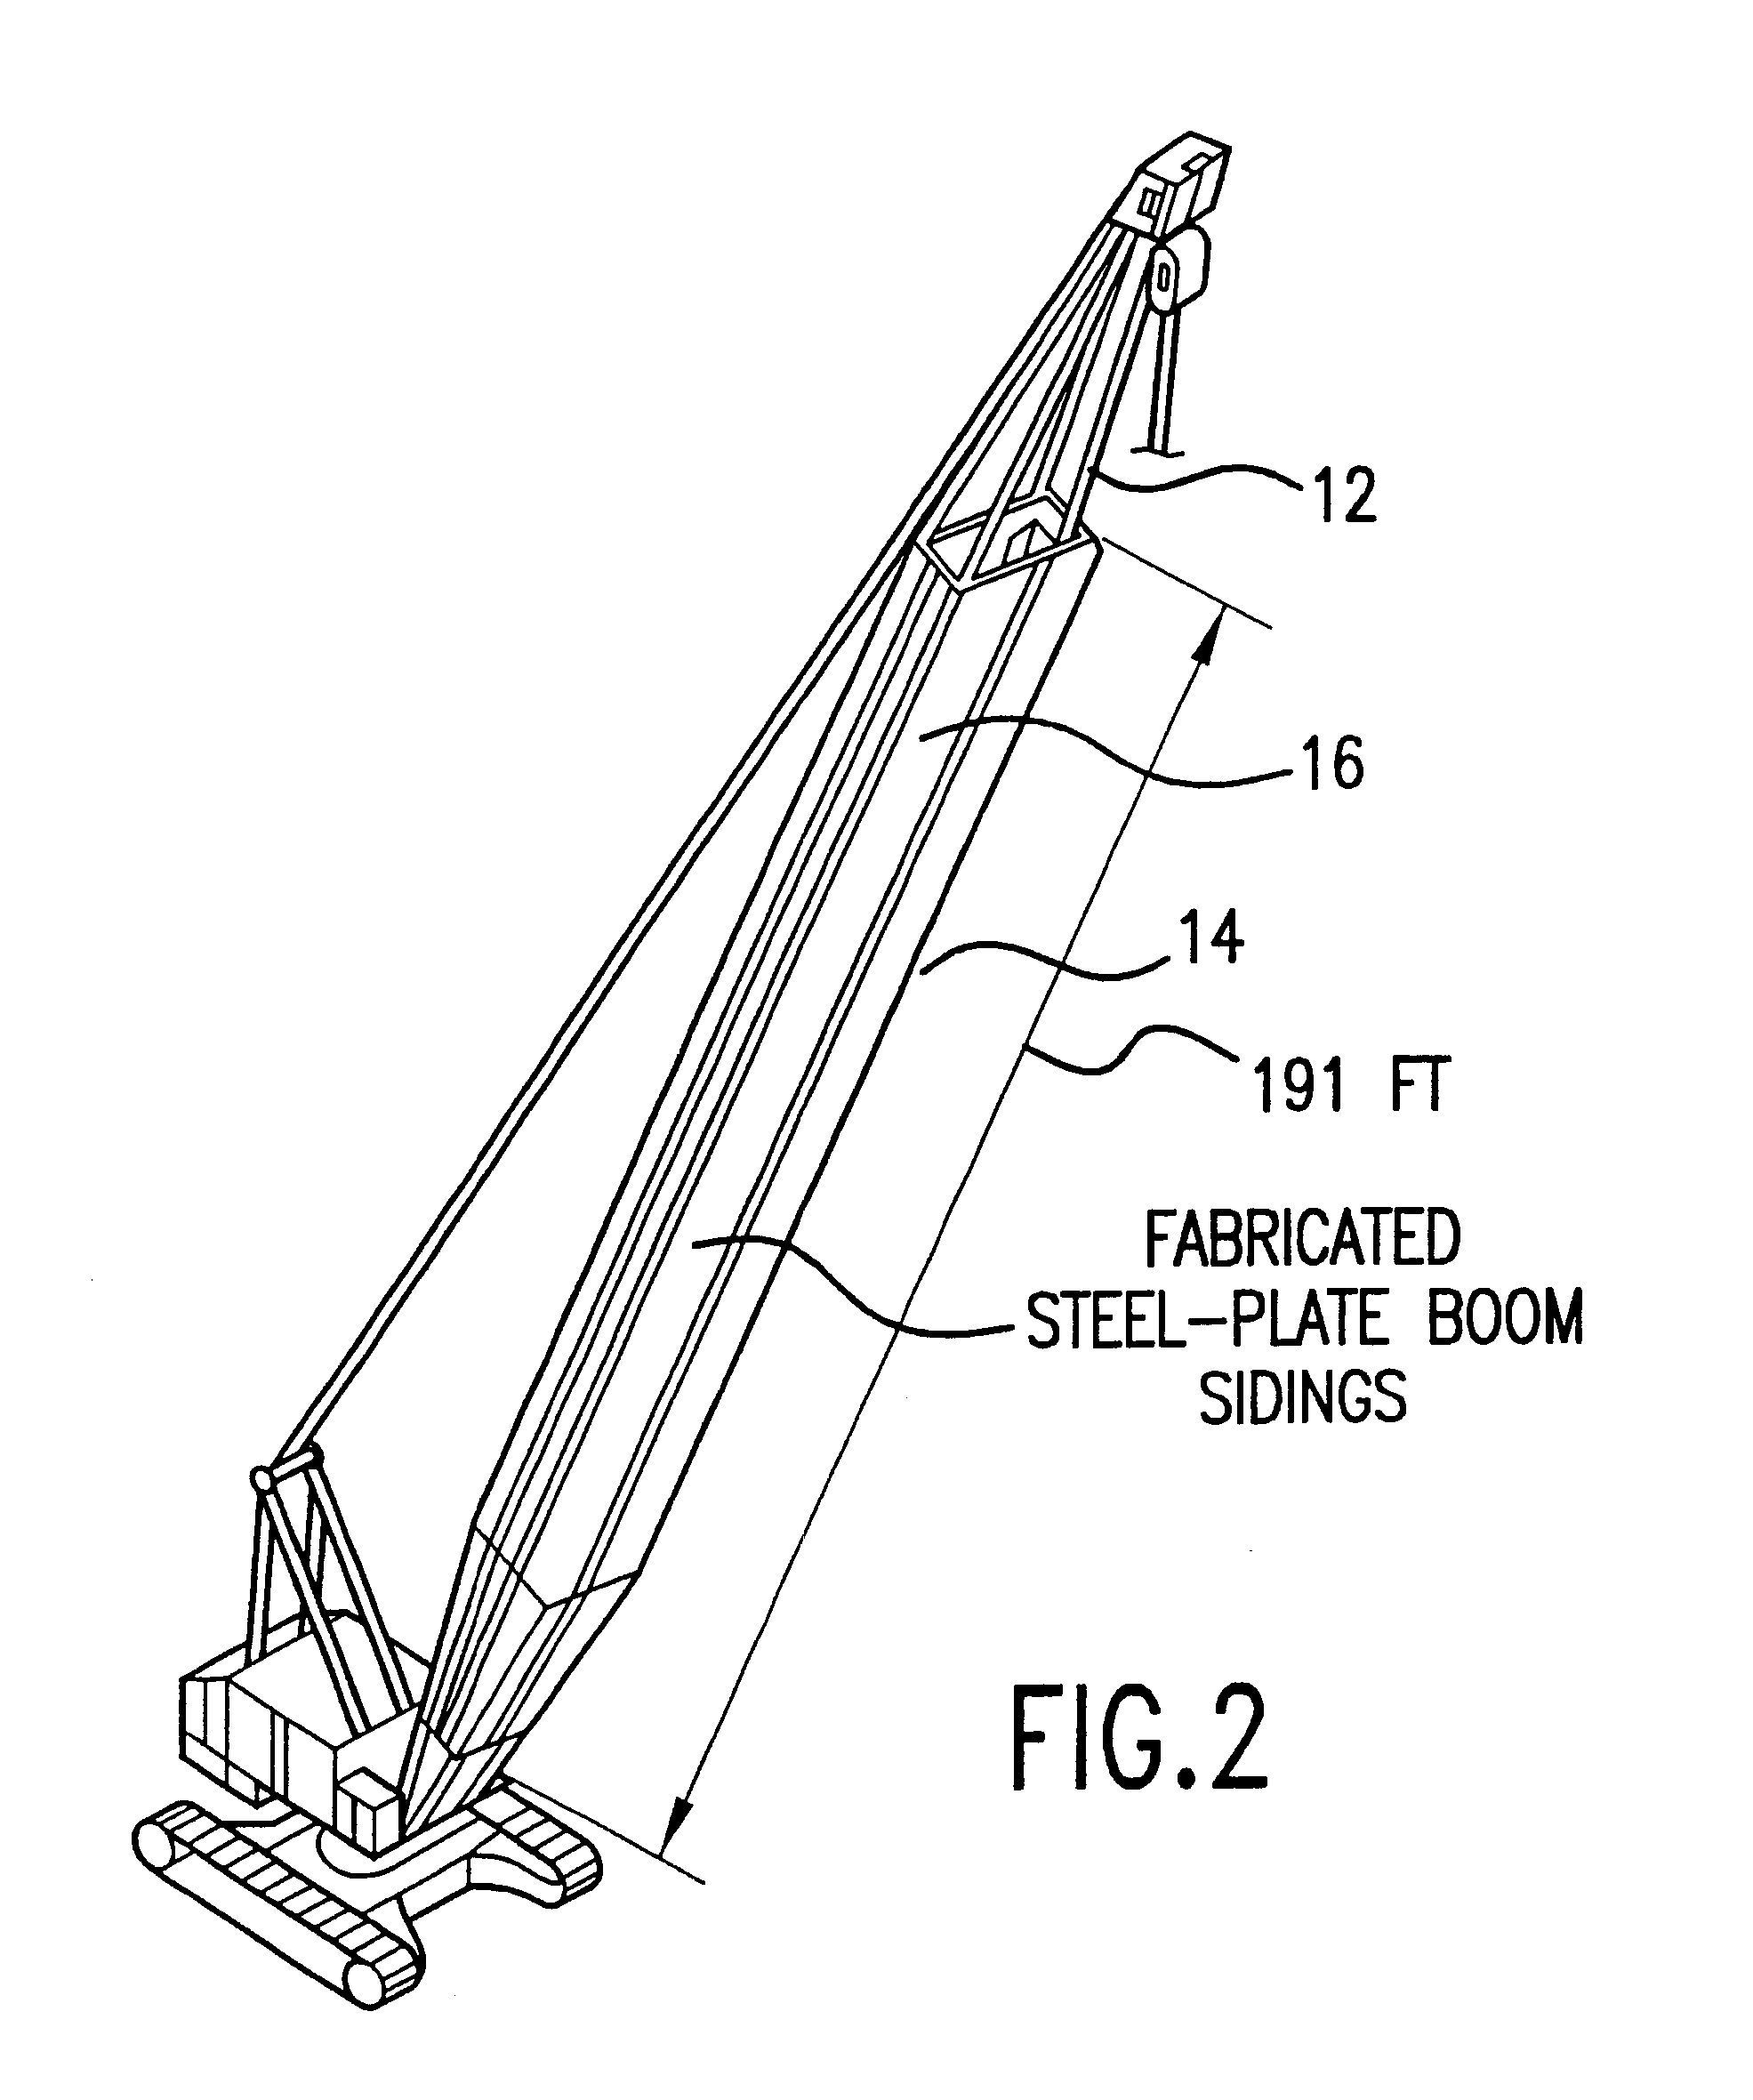 Method of harvesting timber trees in a jungle and a machine for performing said method